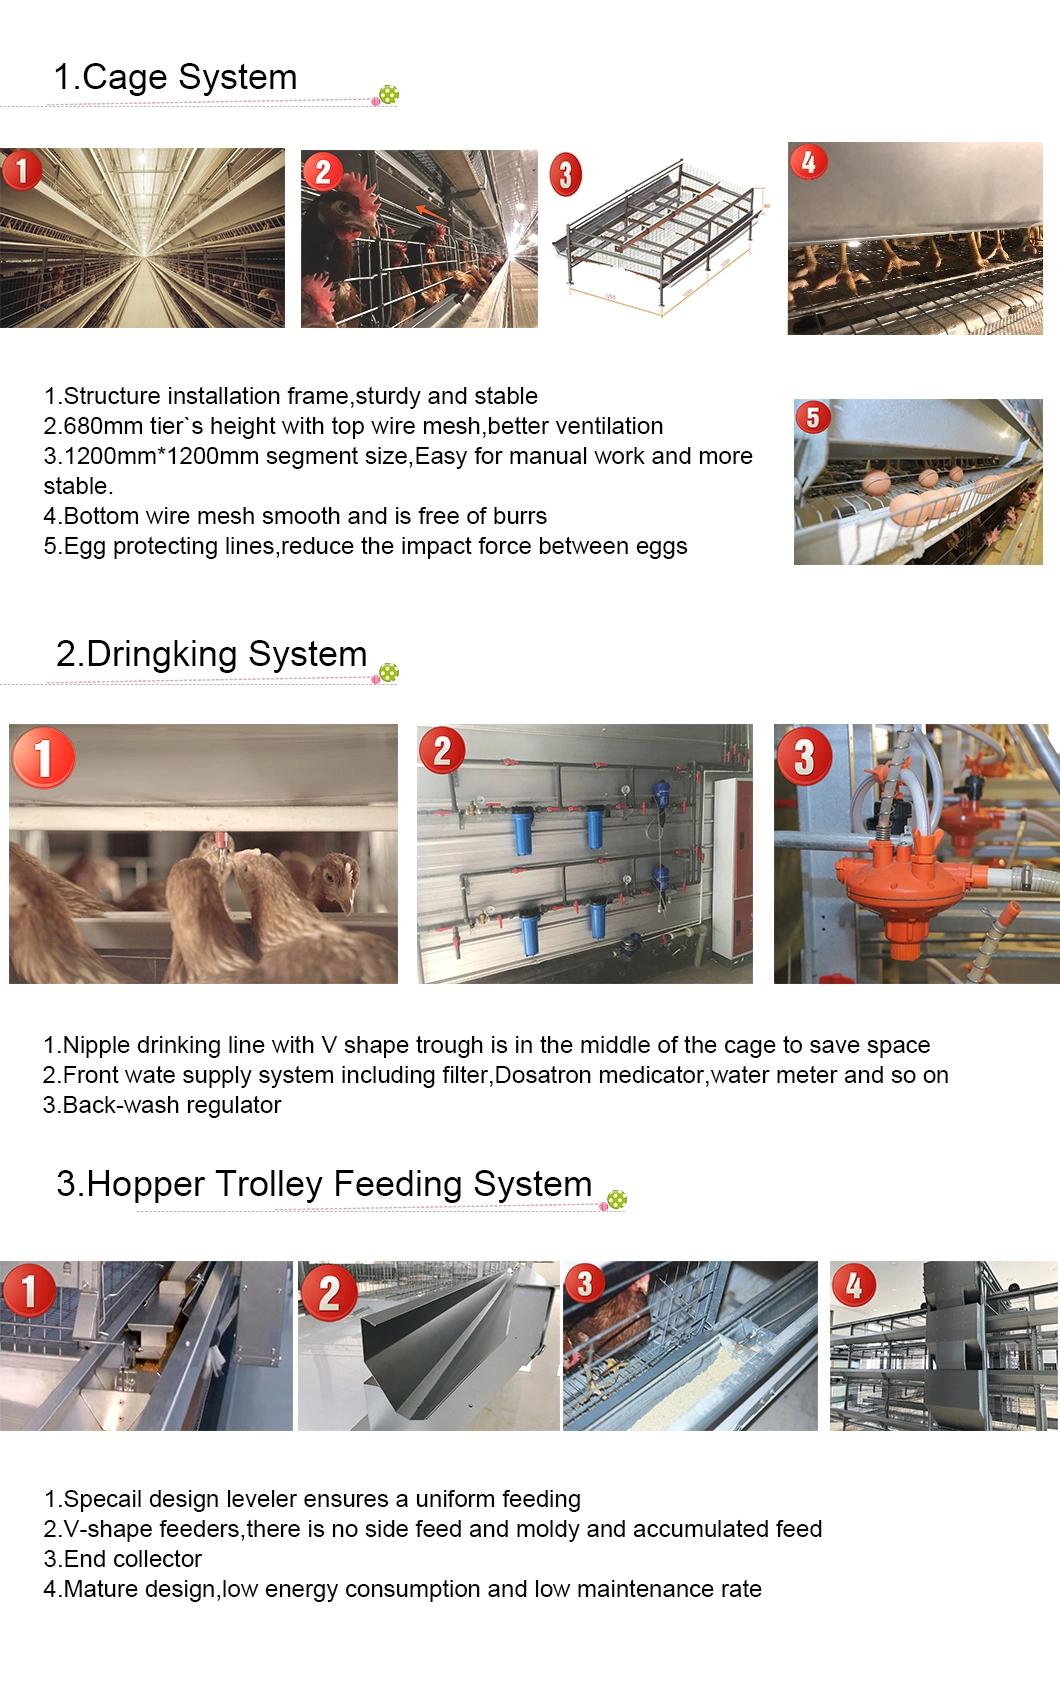 Longfeng Poultry Drinkers Dairy Machine Computerized Mature Design Egg Factory Equipment